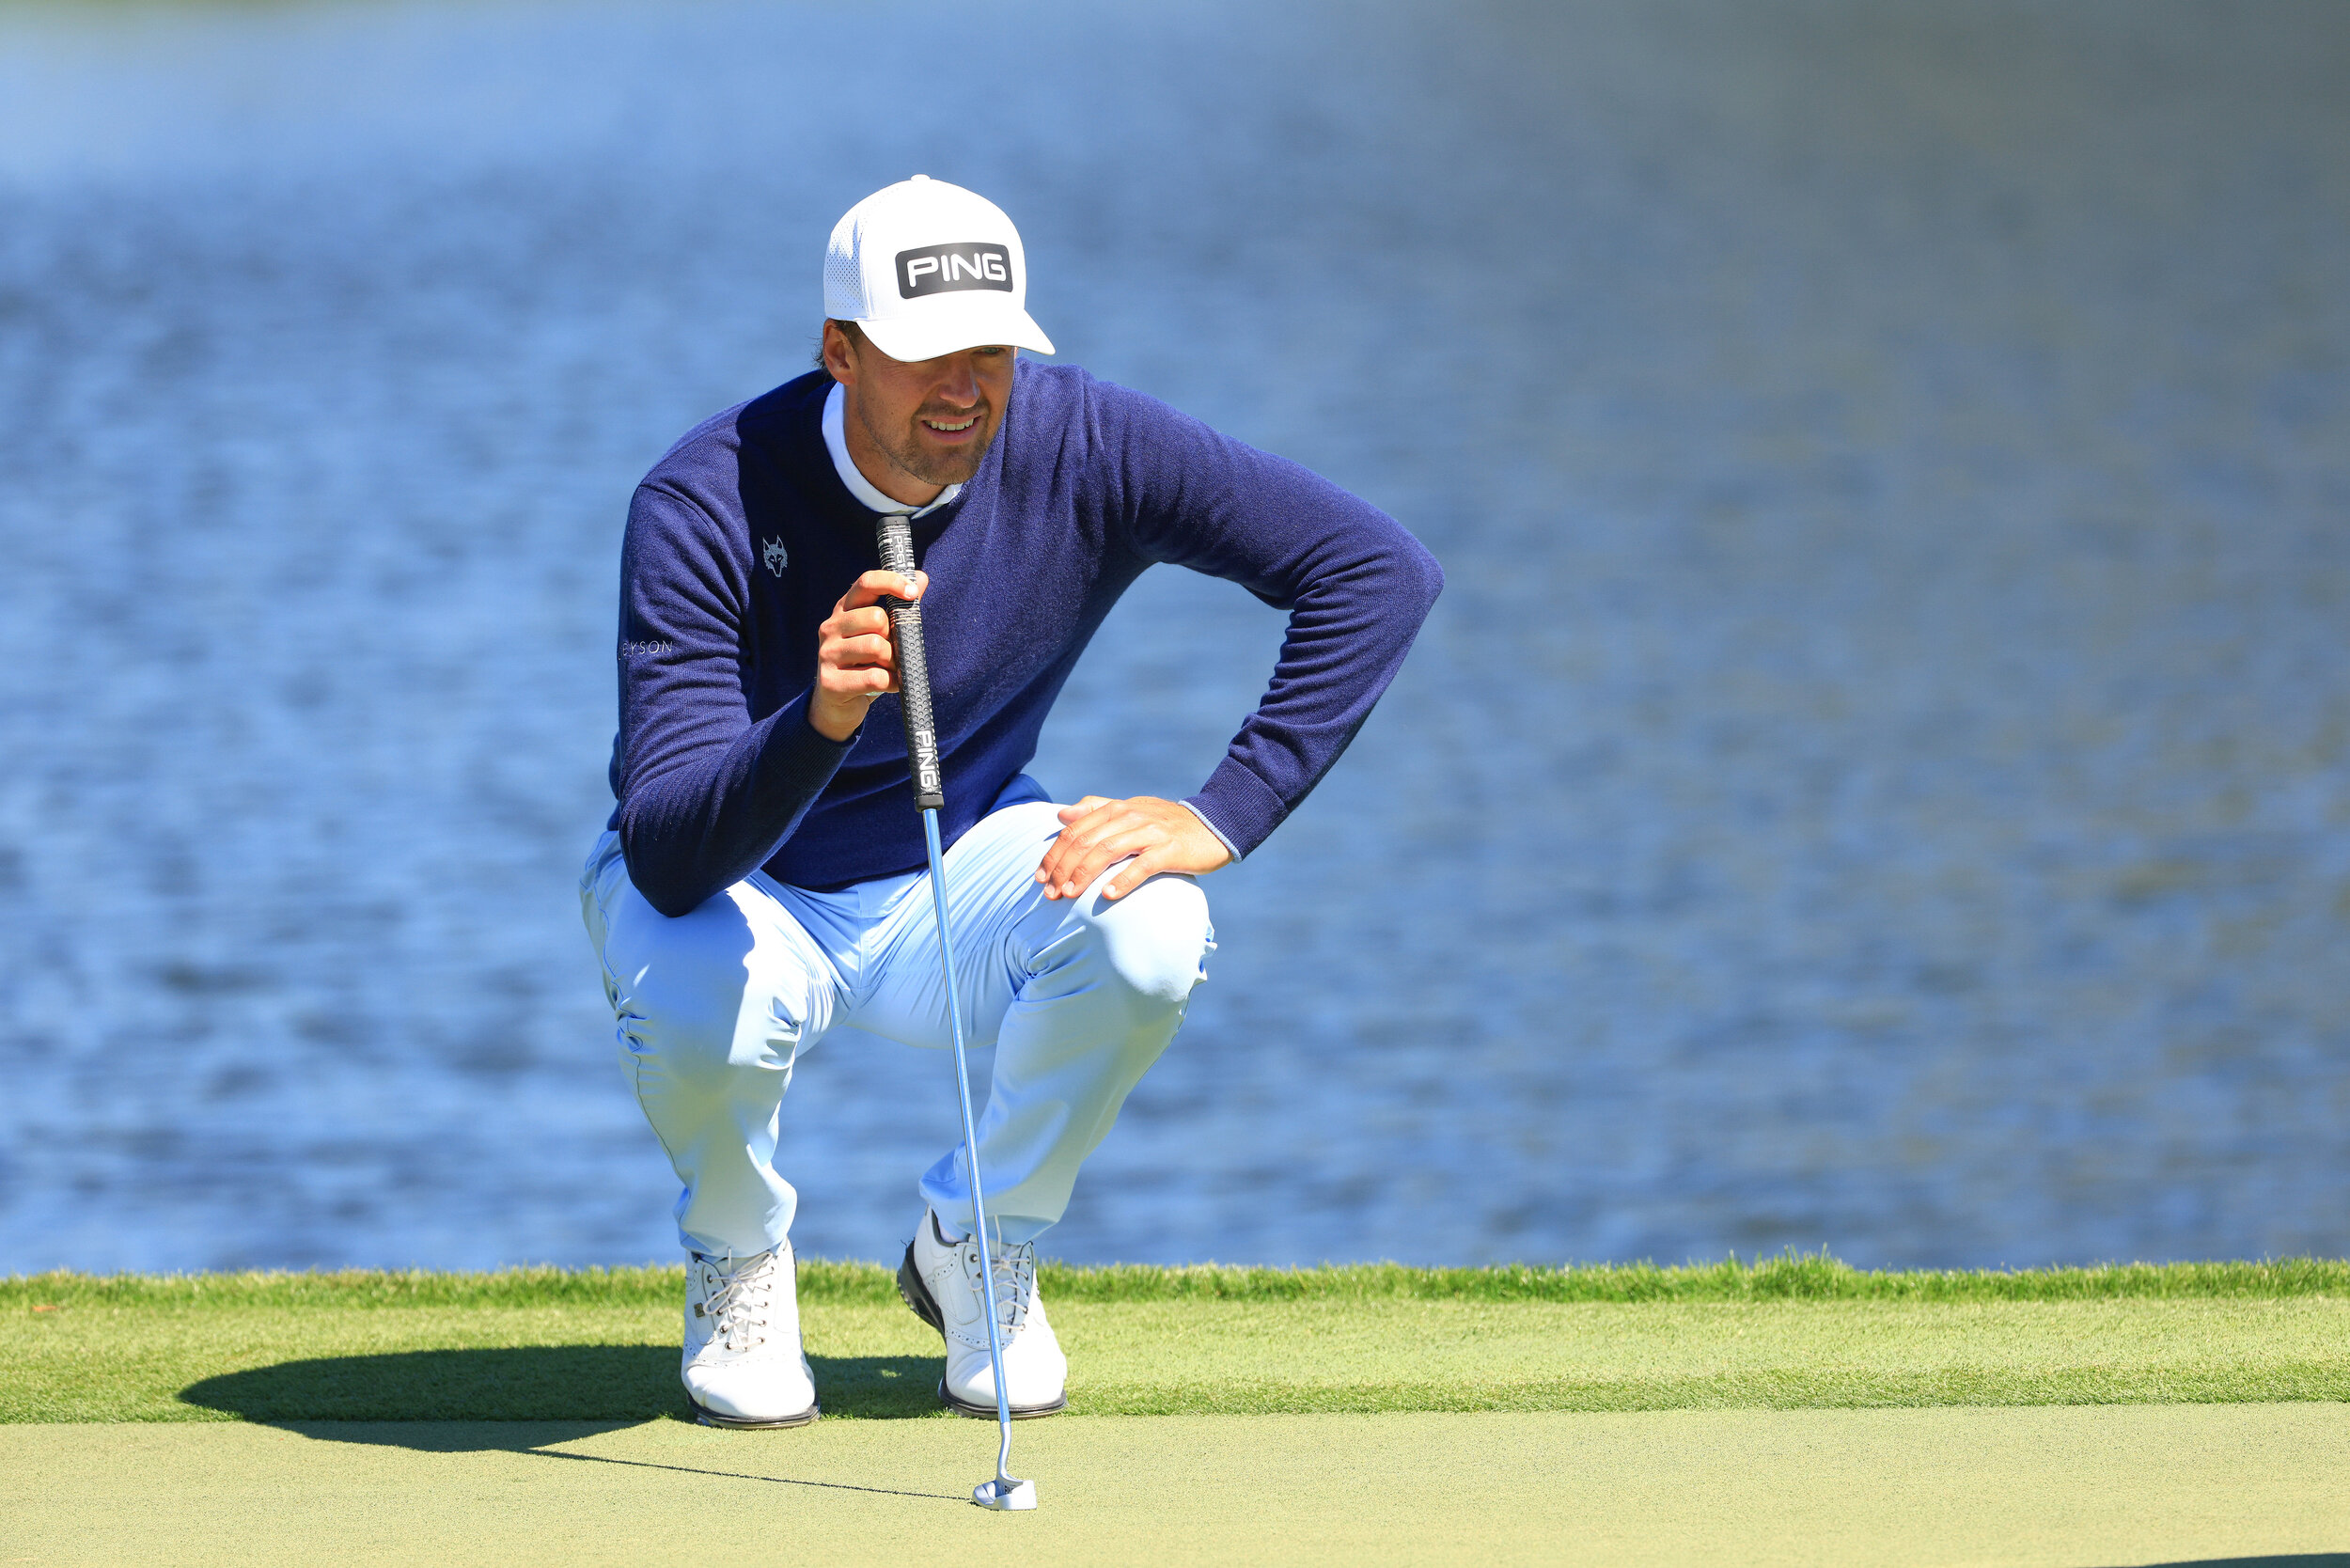  ORLANDO, FLORIDA - MARCH 04: Victor Perez of France lines up a putt on the sixth green during the first round of the Arnold Palmer Invitational Presented by MasterCard at the Bay Hill Club and Lodge on March 04, 2021 in Orlando, Florida. (Photo by M